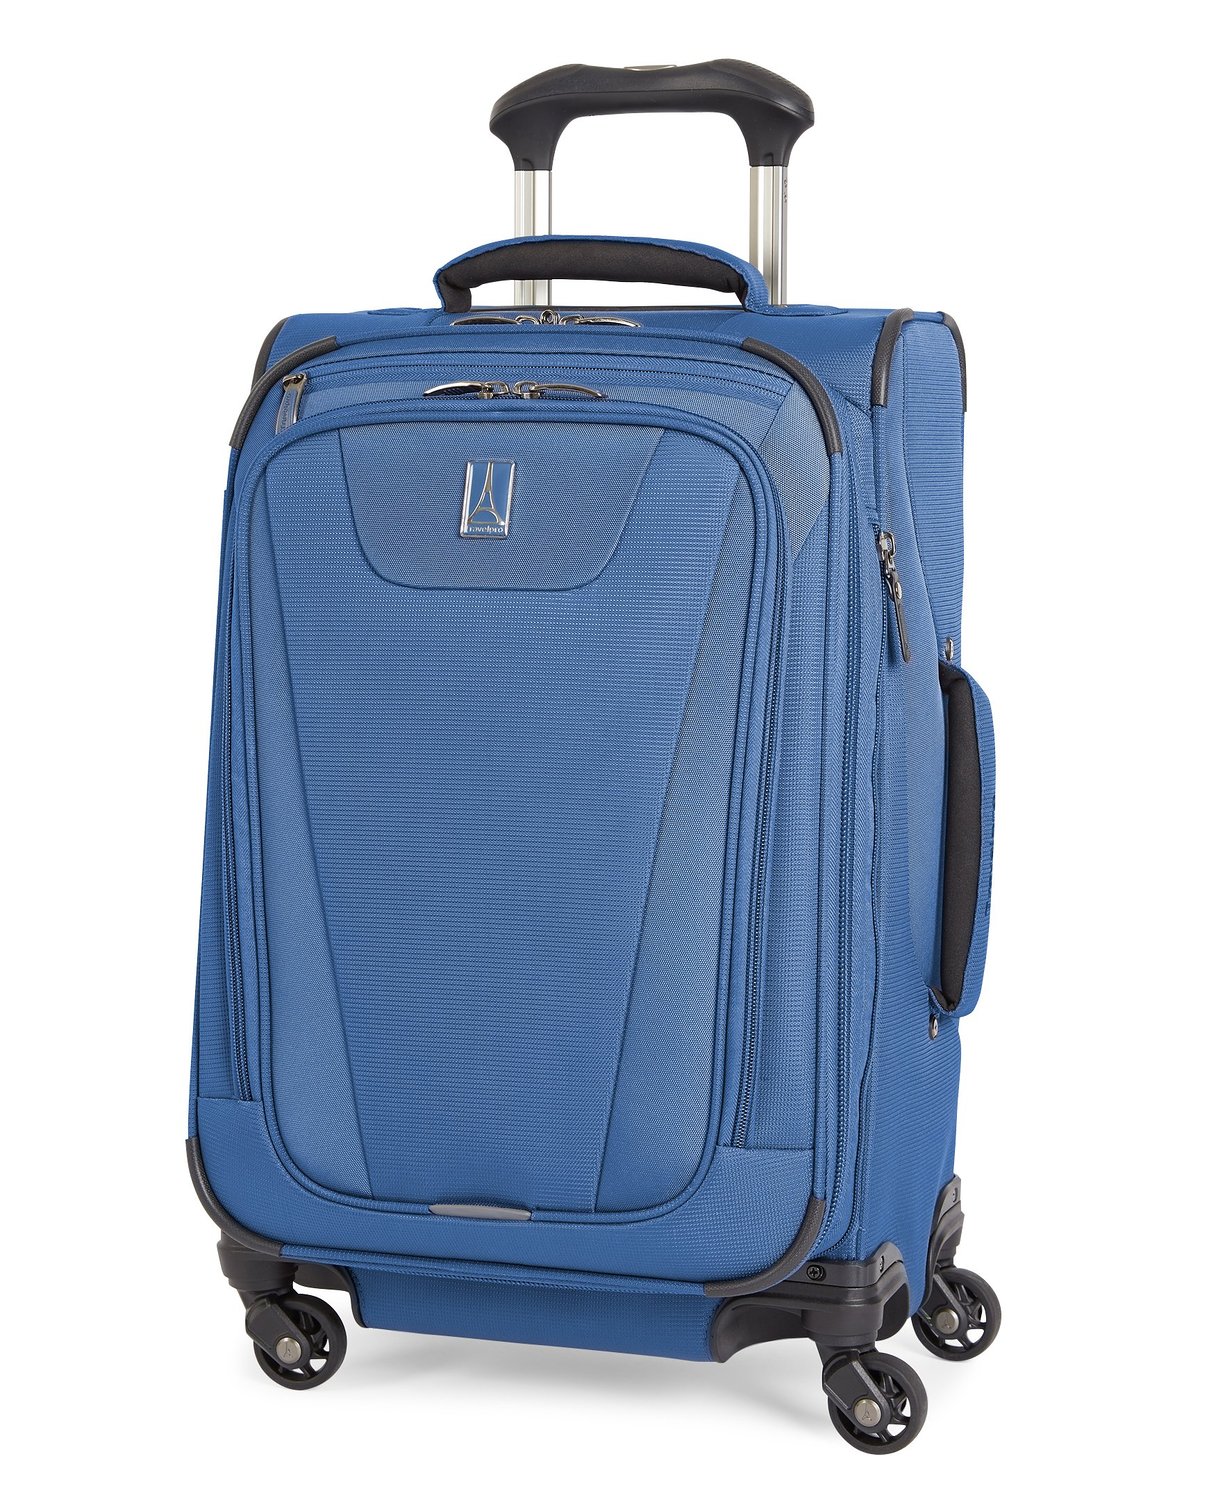 Travelpro Maxlite 4 Expandable 21 Inch Spinner Suitcase | eBay